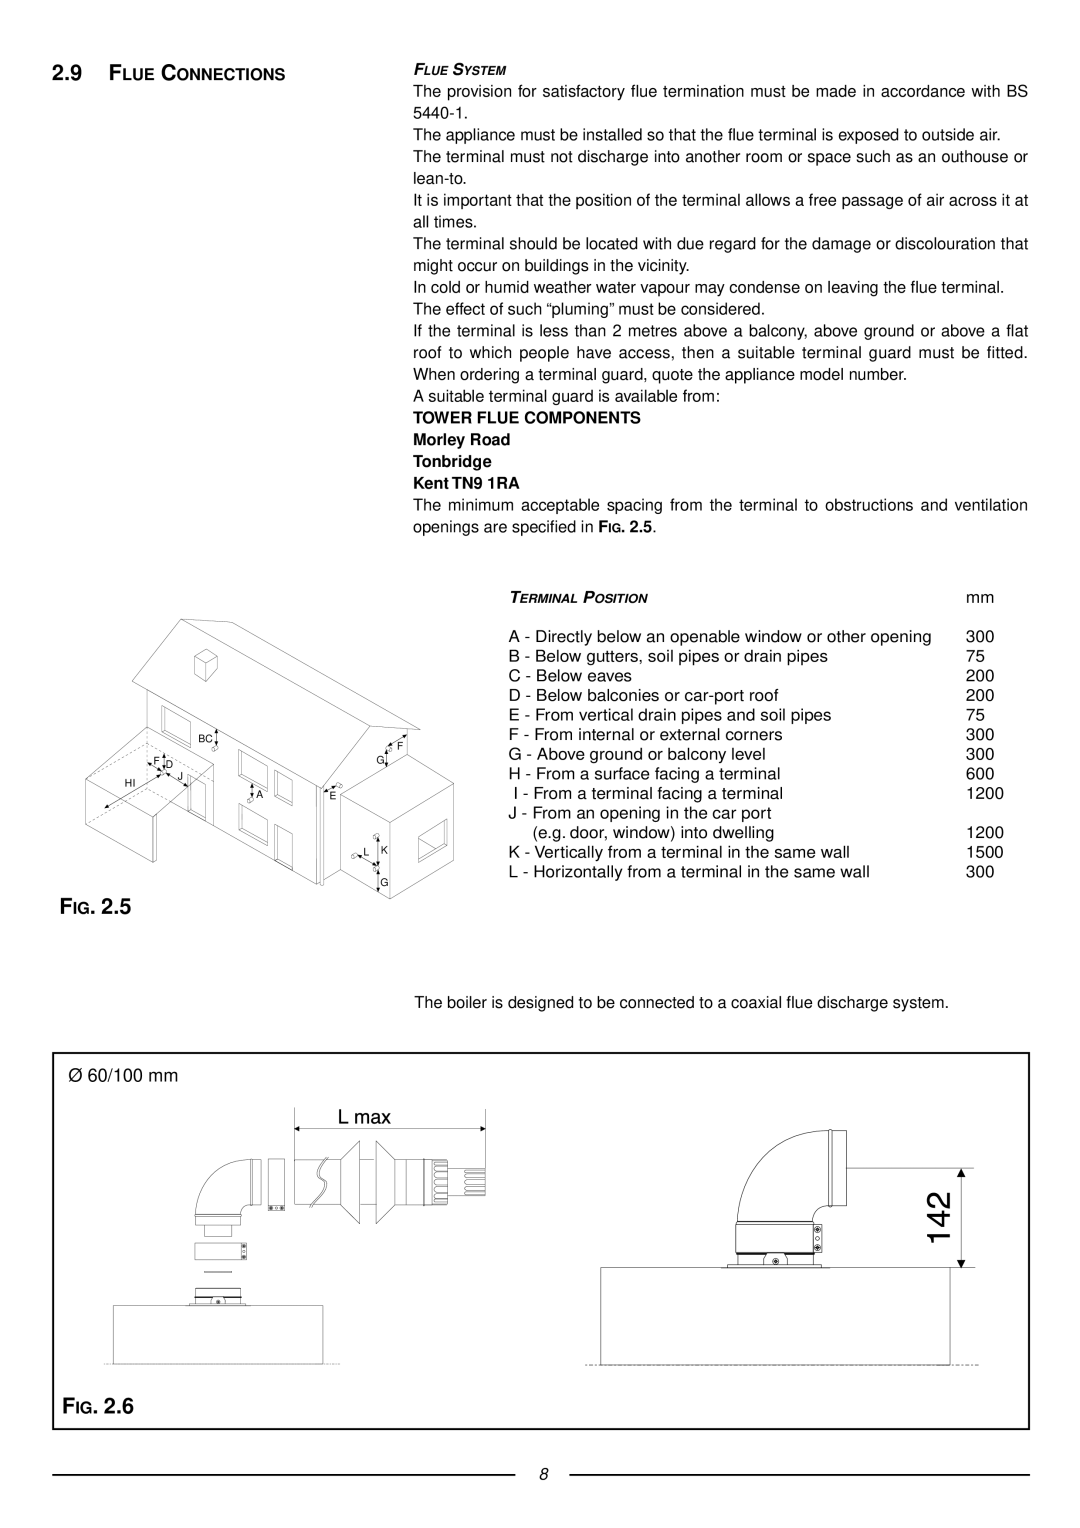 Ariston 41-116-04 installation instructions Flue Connections, Tower Flue Components 